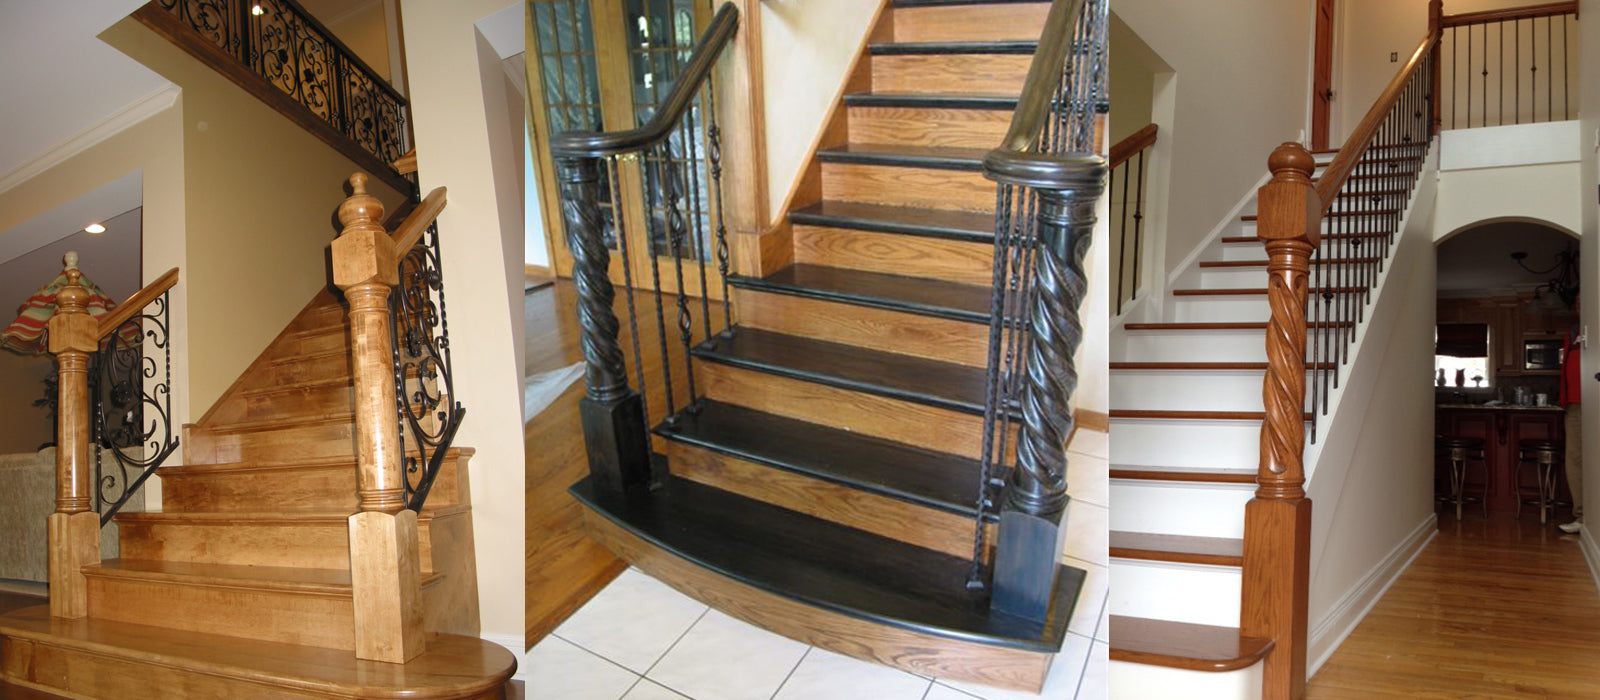 Inspired & Distinctivly Crafted | Custom Trophy Newel Posts with wrought iron balustrades